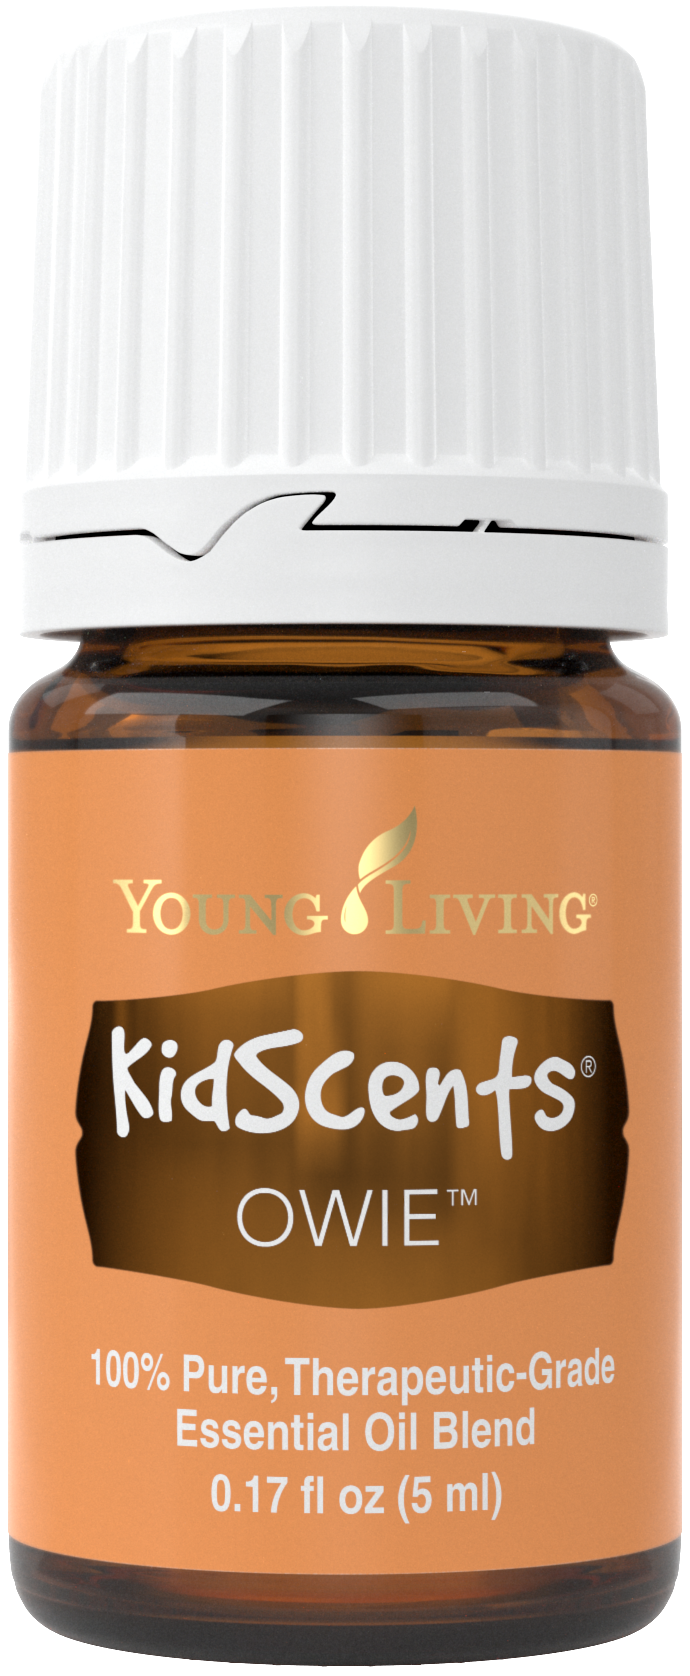 KidScents Owie 5ml Silo.png